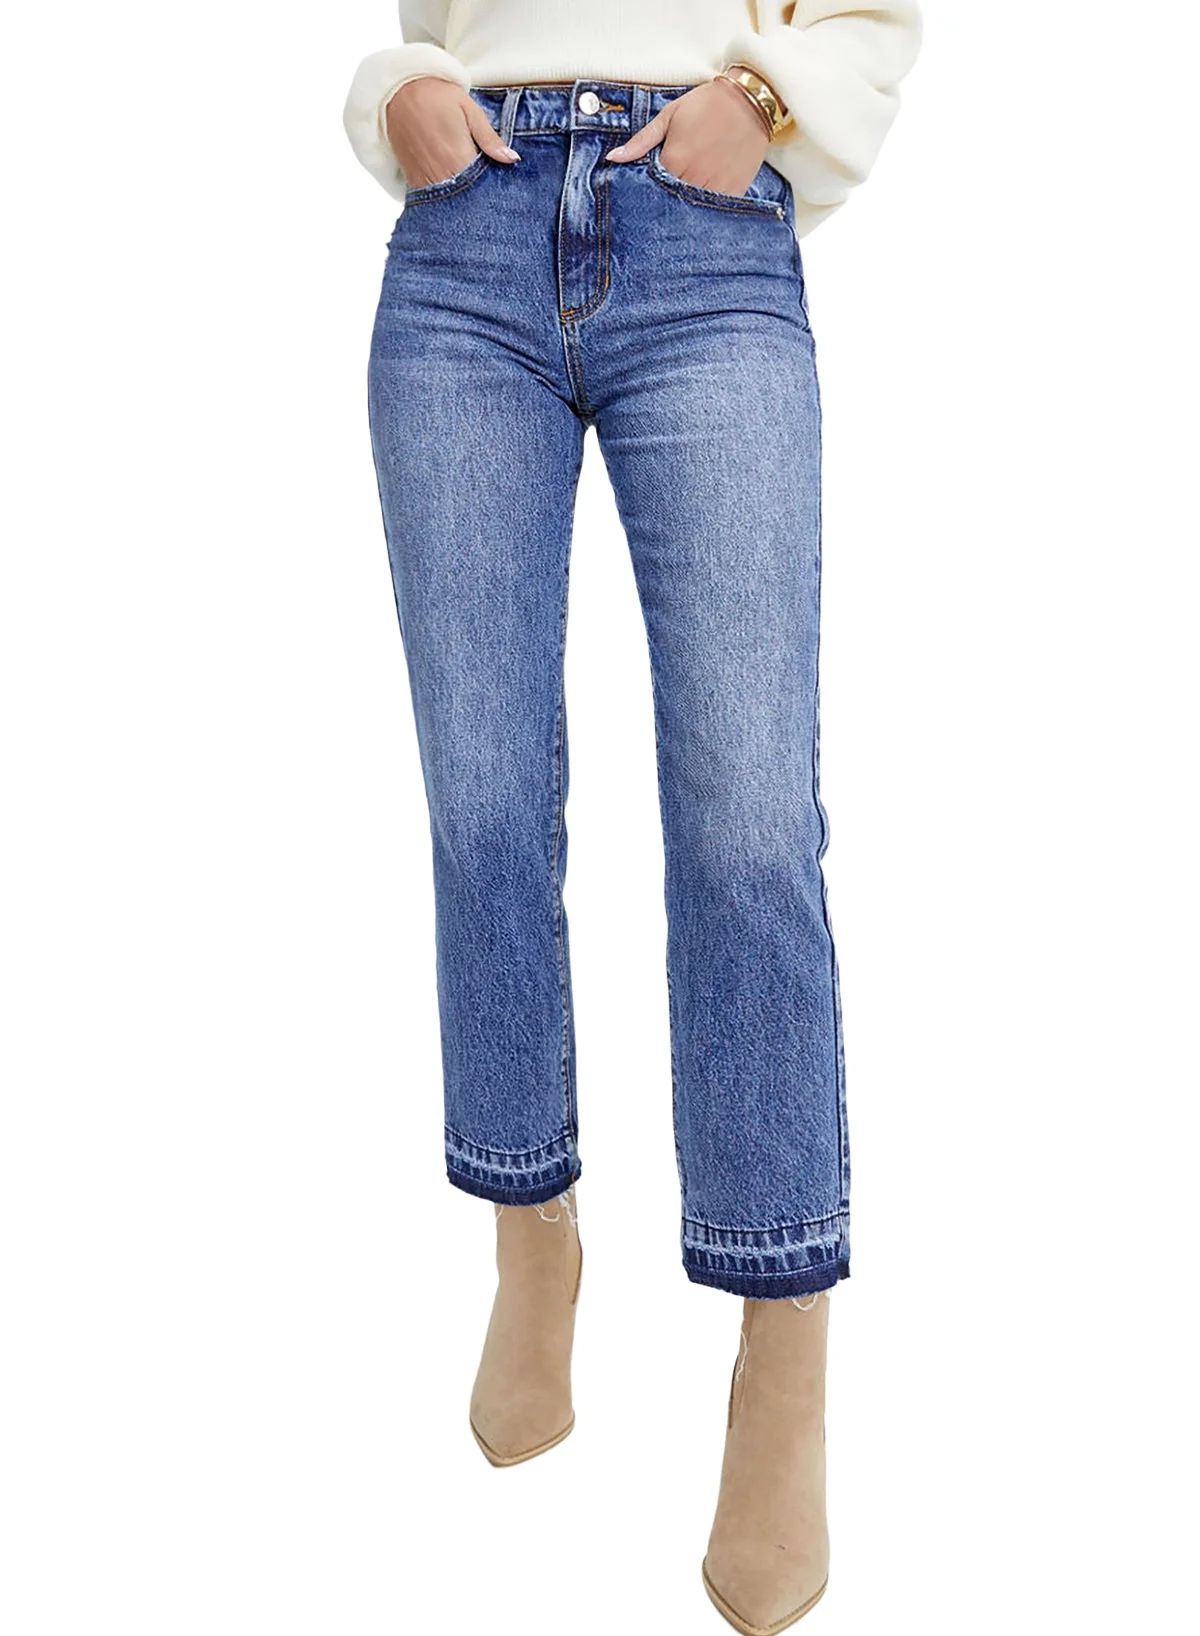 Dokotoo Cropped Jeans for Women High Waisted Frayed Hem Denim Pants Casual Straight Leg Stretchy ... | Walmart (US)